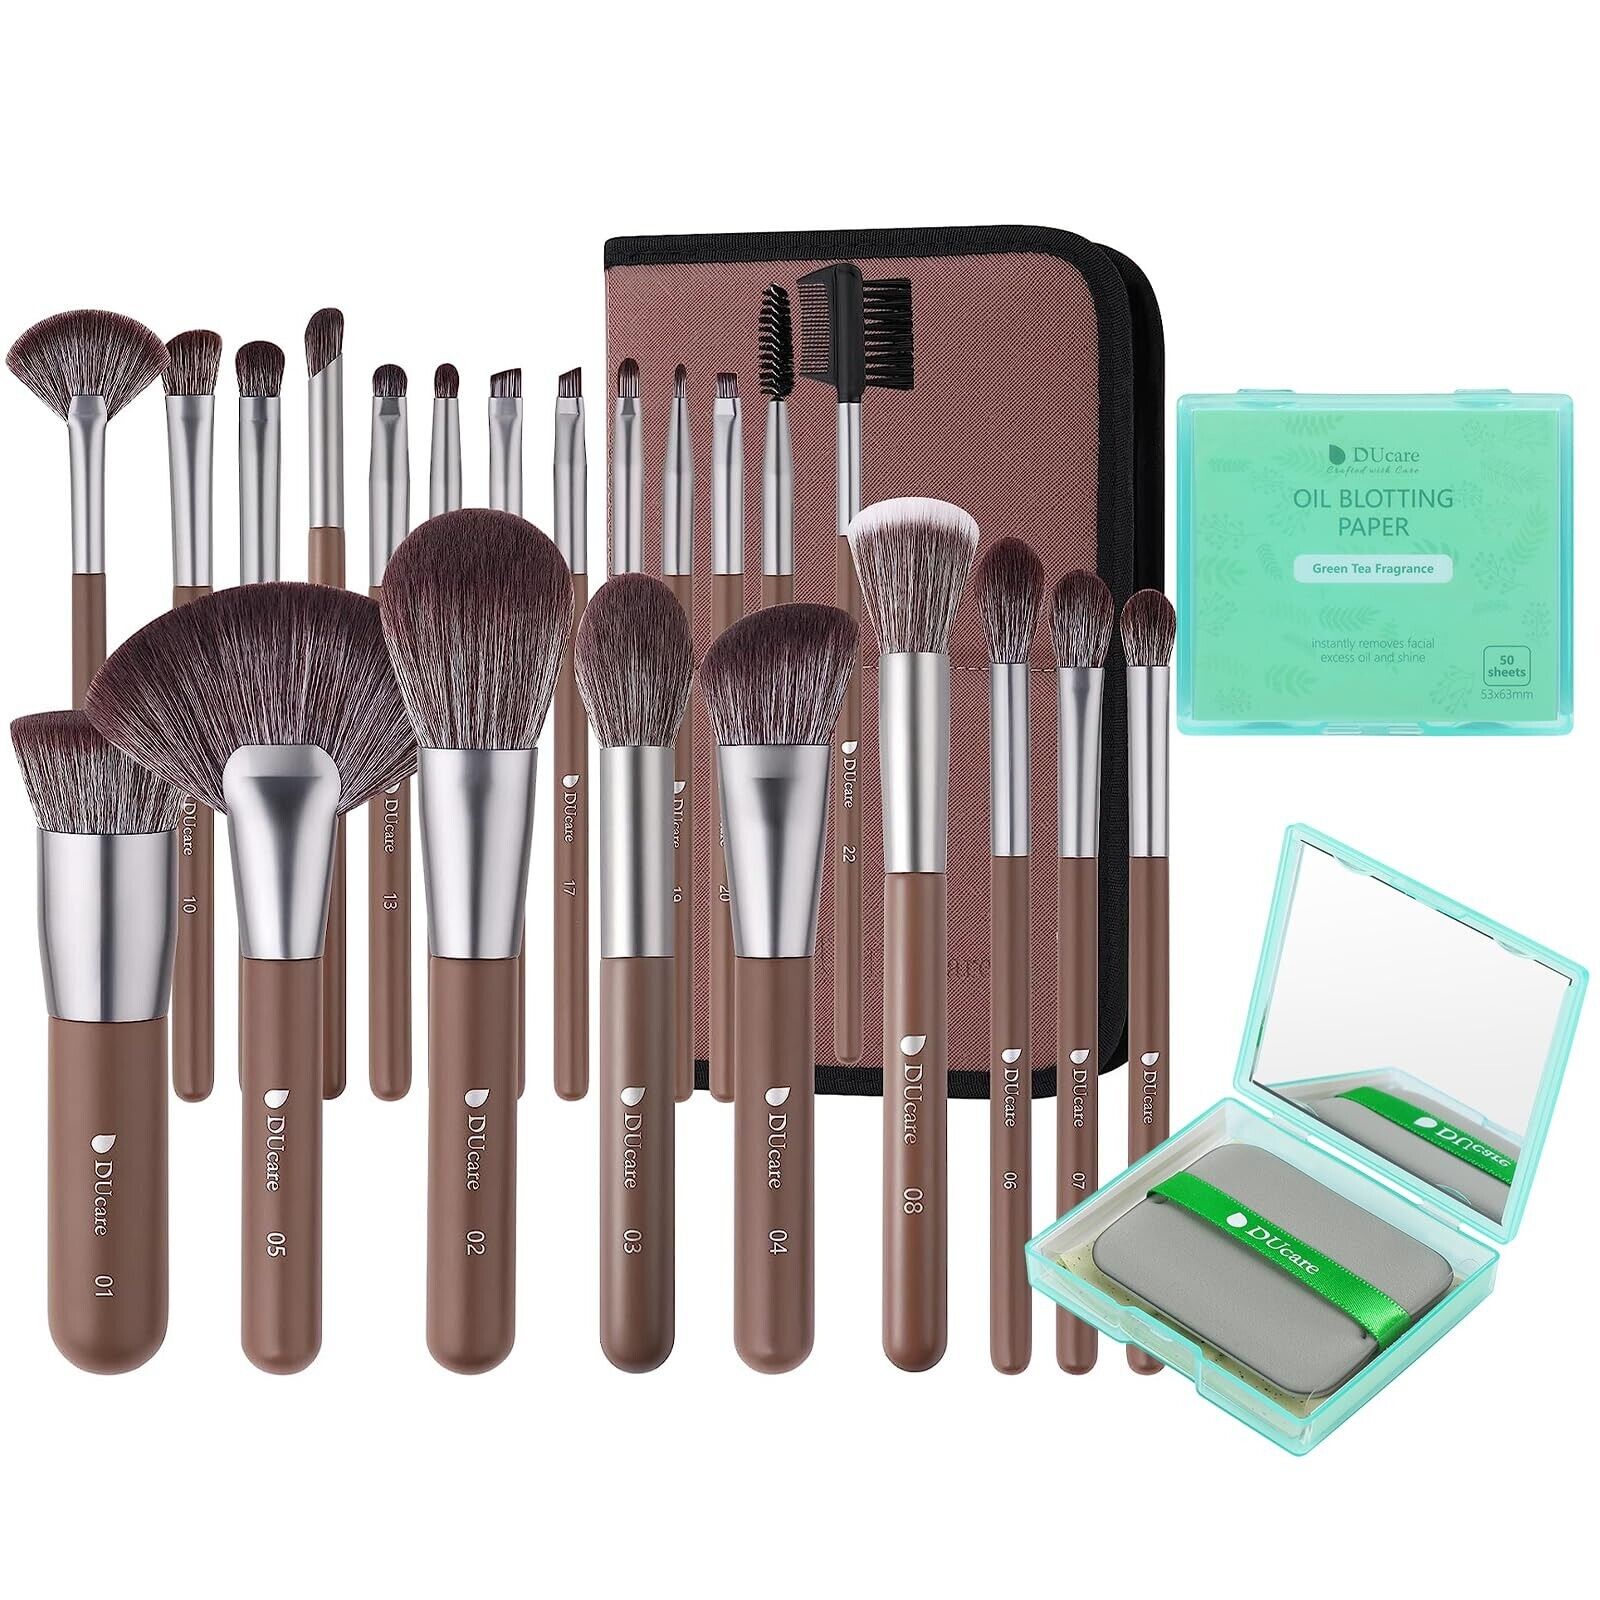 DUcare Makeup Brushes Professional with Bag 22Pcs+Oil Blotting Sheets for Face